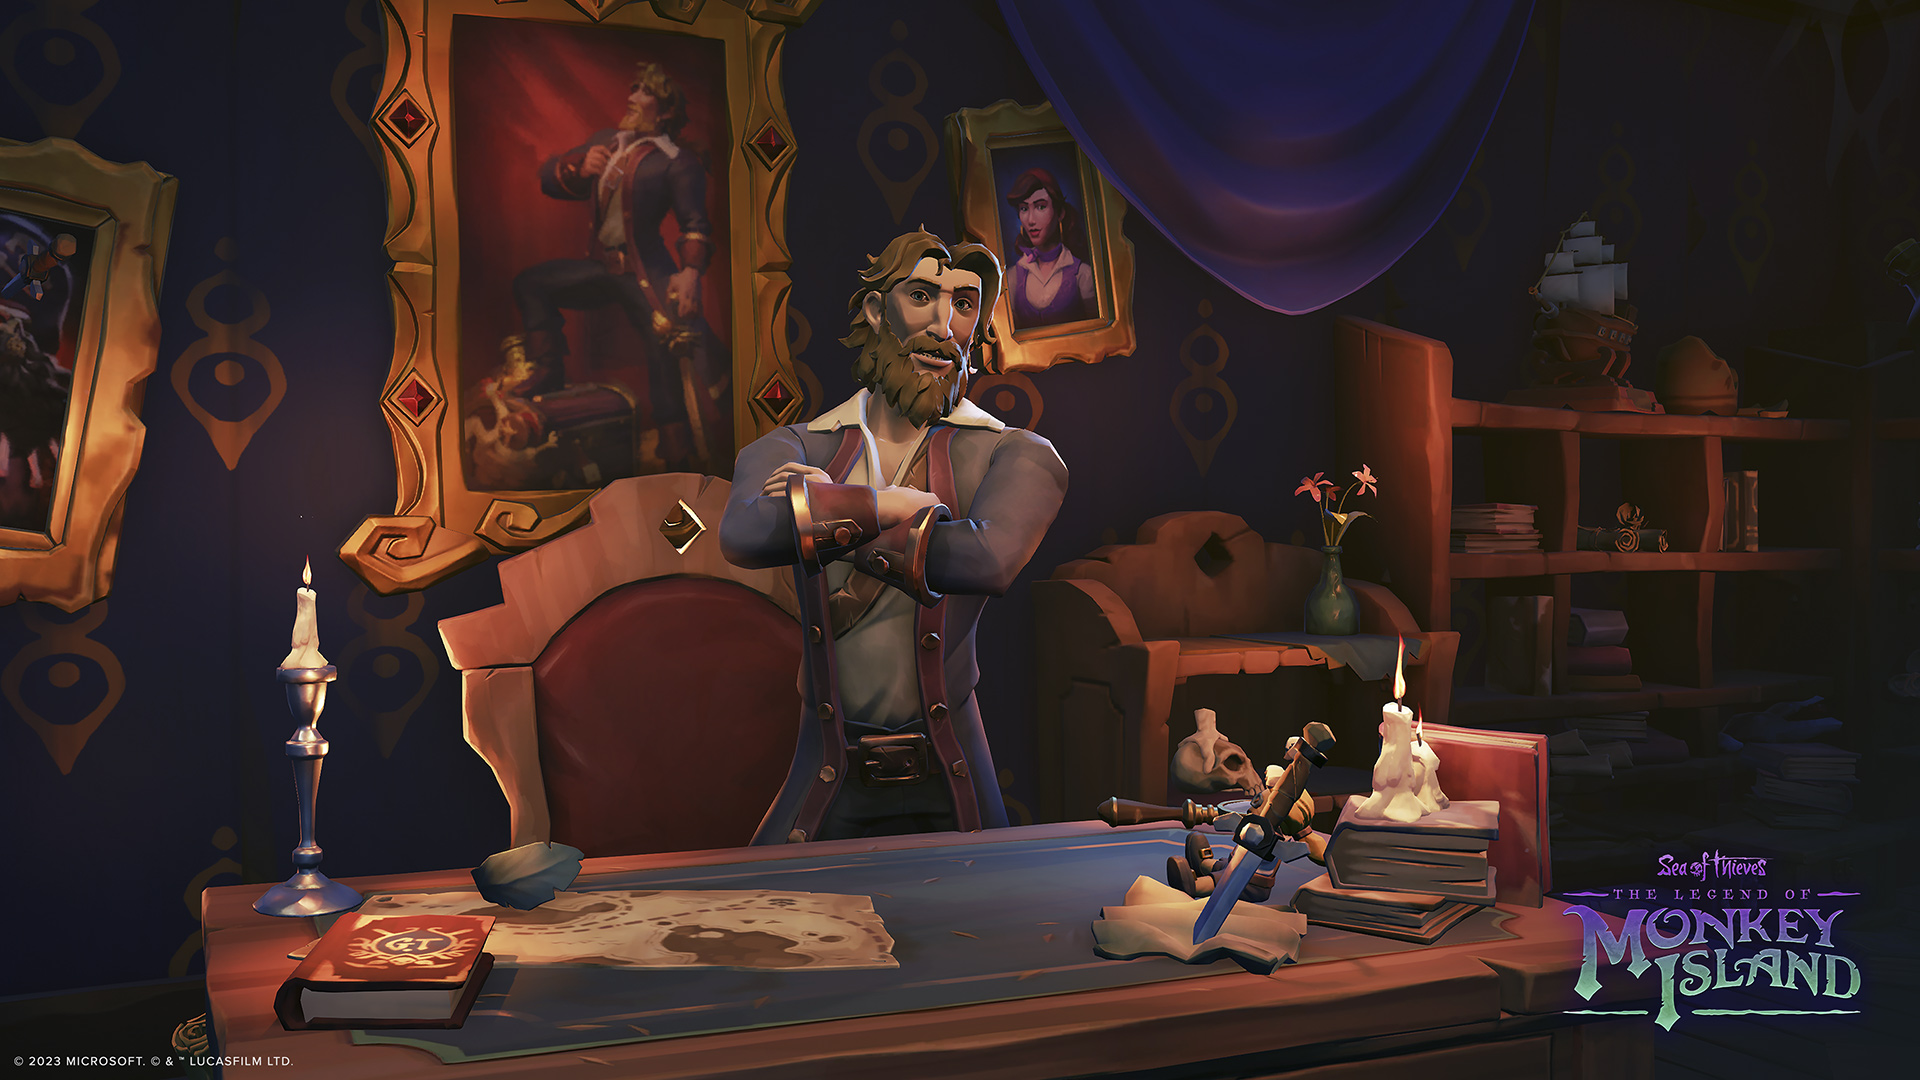 A gameplay screenshot from The Legend of Monkey Island and Sea of Thieves